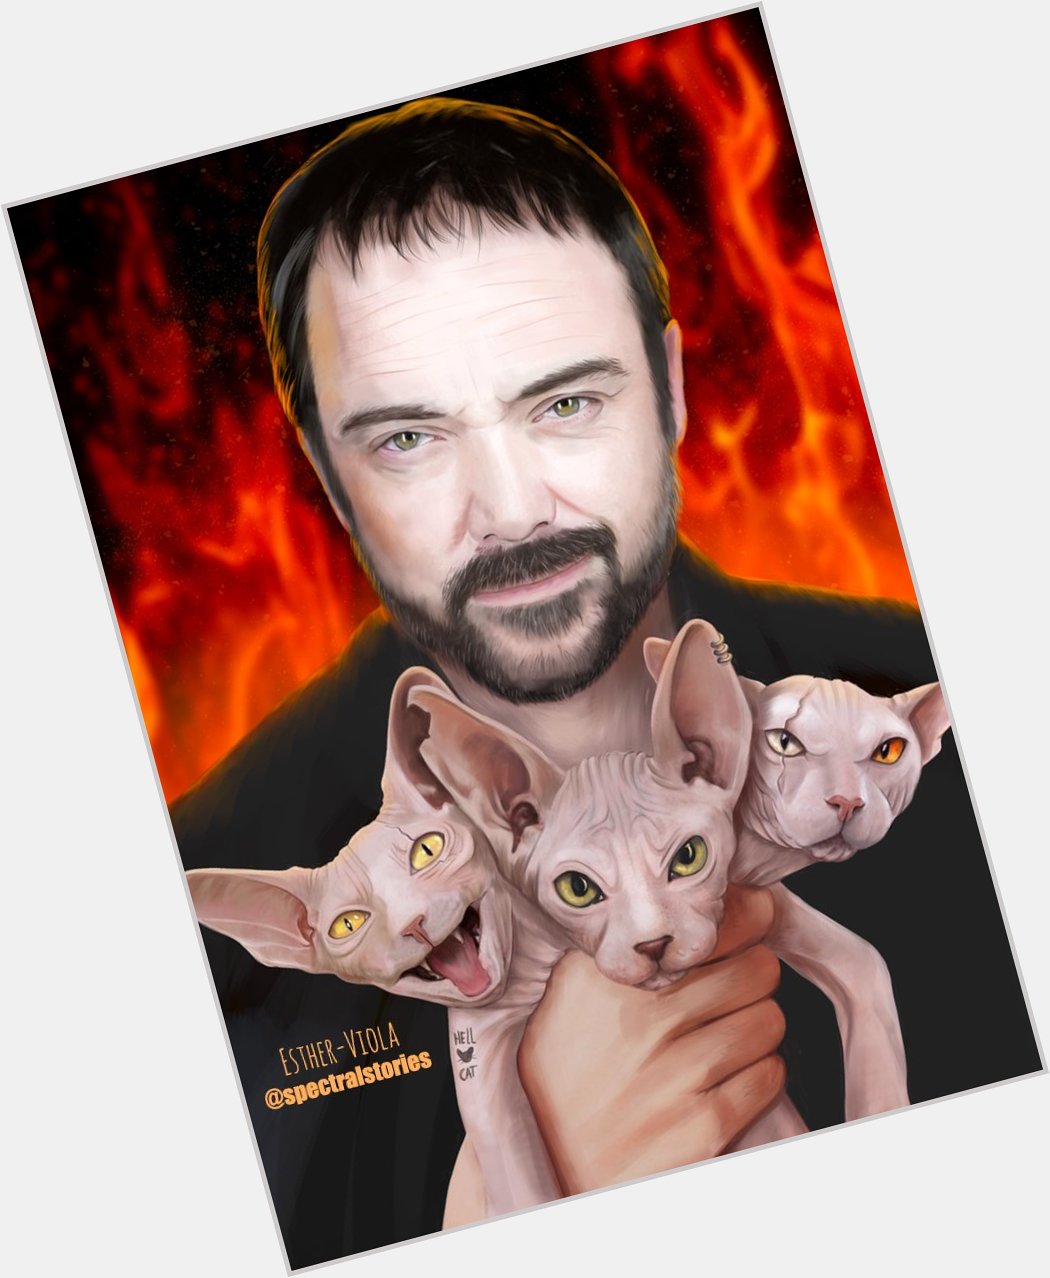 Finished portraid of with a 3 headed hellcat (also: a belated happy birthday to Mark!!). 